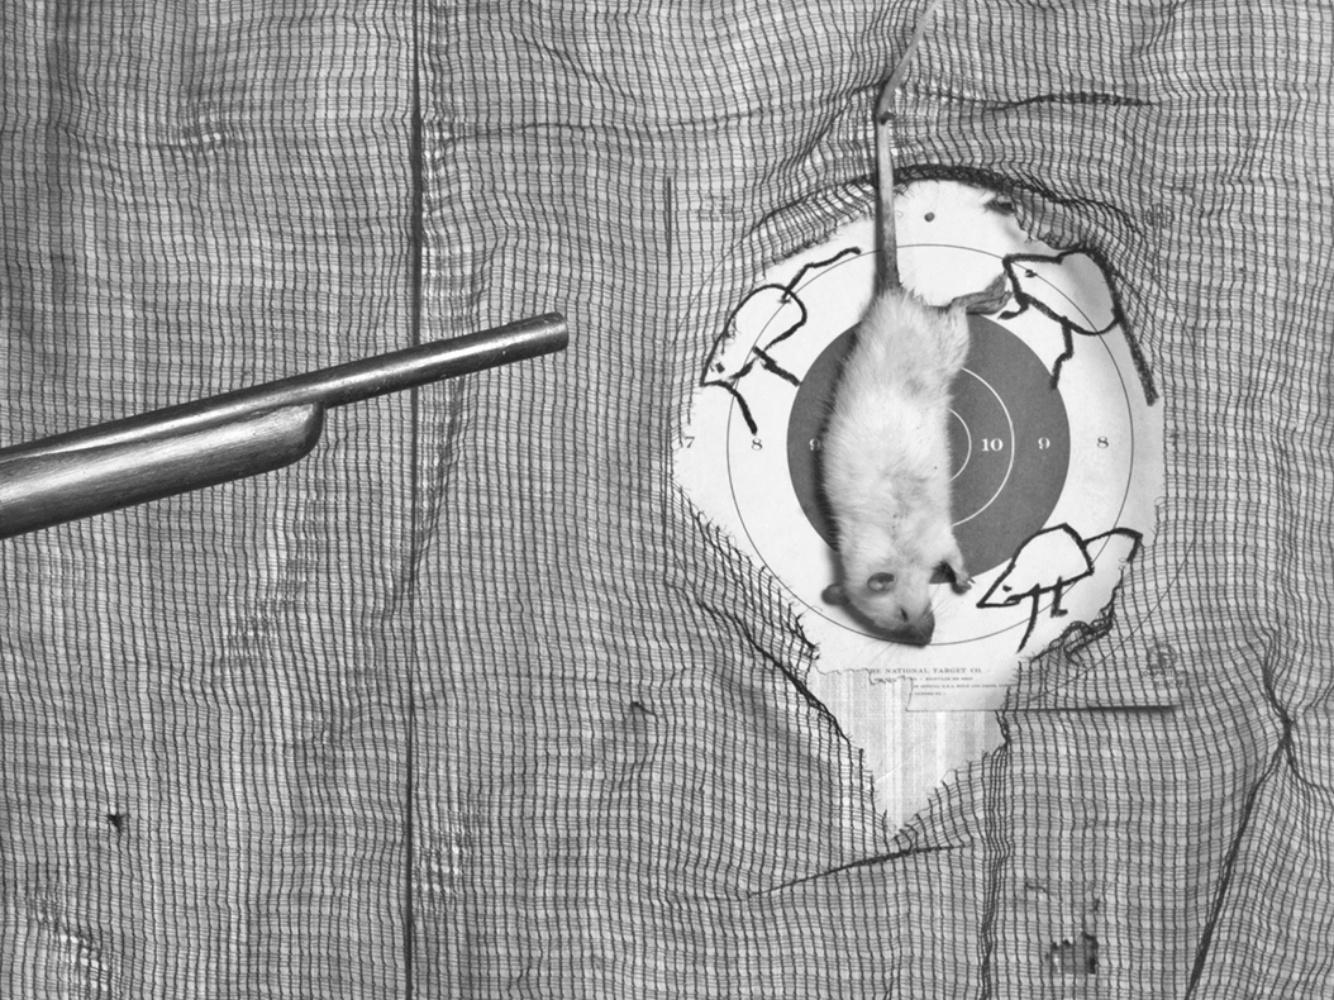 Roger BALLEN (*1950, America/South Africa)
Targeting, 2015
Archival pigment print
43 x 61 cm (16 7/8 x 24 in.)
Edition of 9, plus 2 AP; Ed. no. 2/9
Print only

– Roger the Rat

Surreal, refined, disturbing: Roger Ballen has made a name for himself